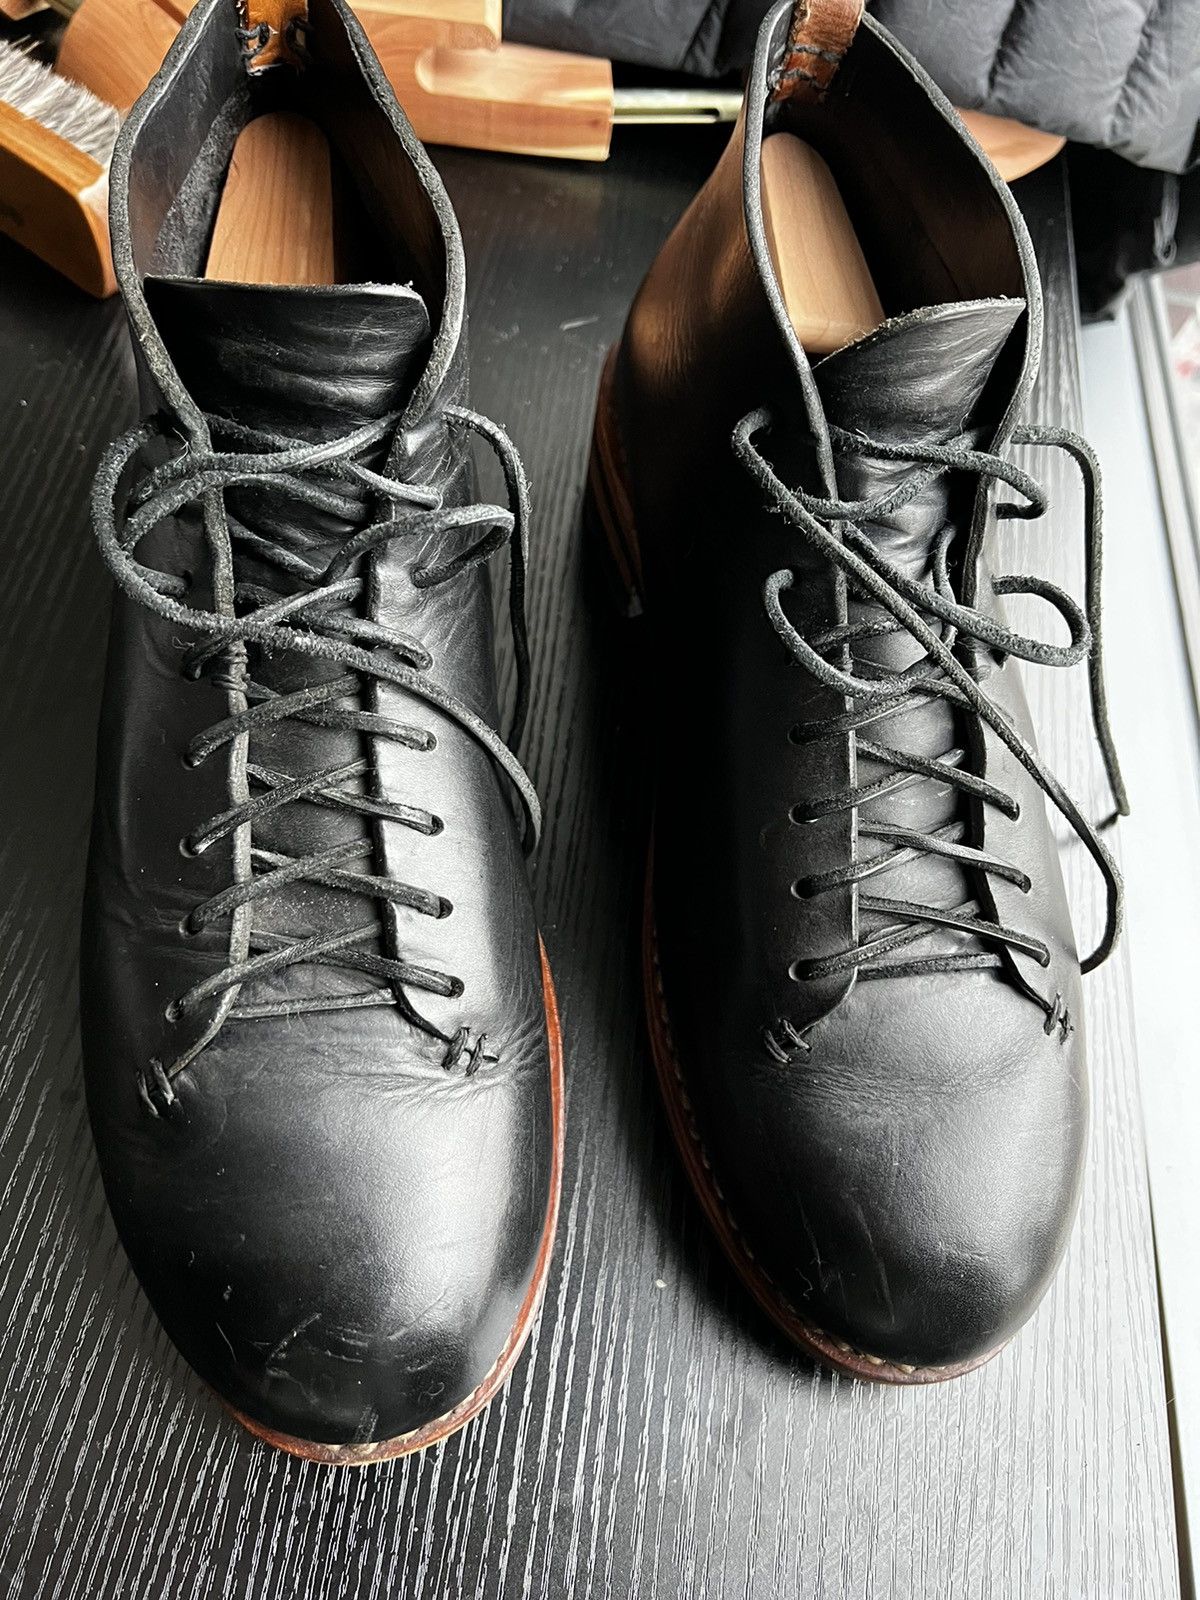 Feit FEIT Hikers in Black Size US 13 / EU 46 - 2 Preview